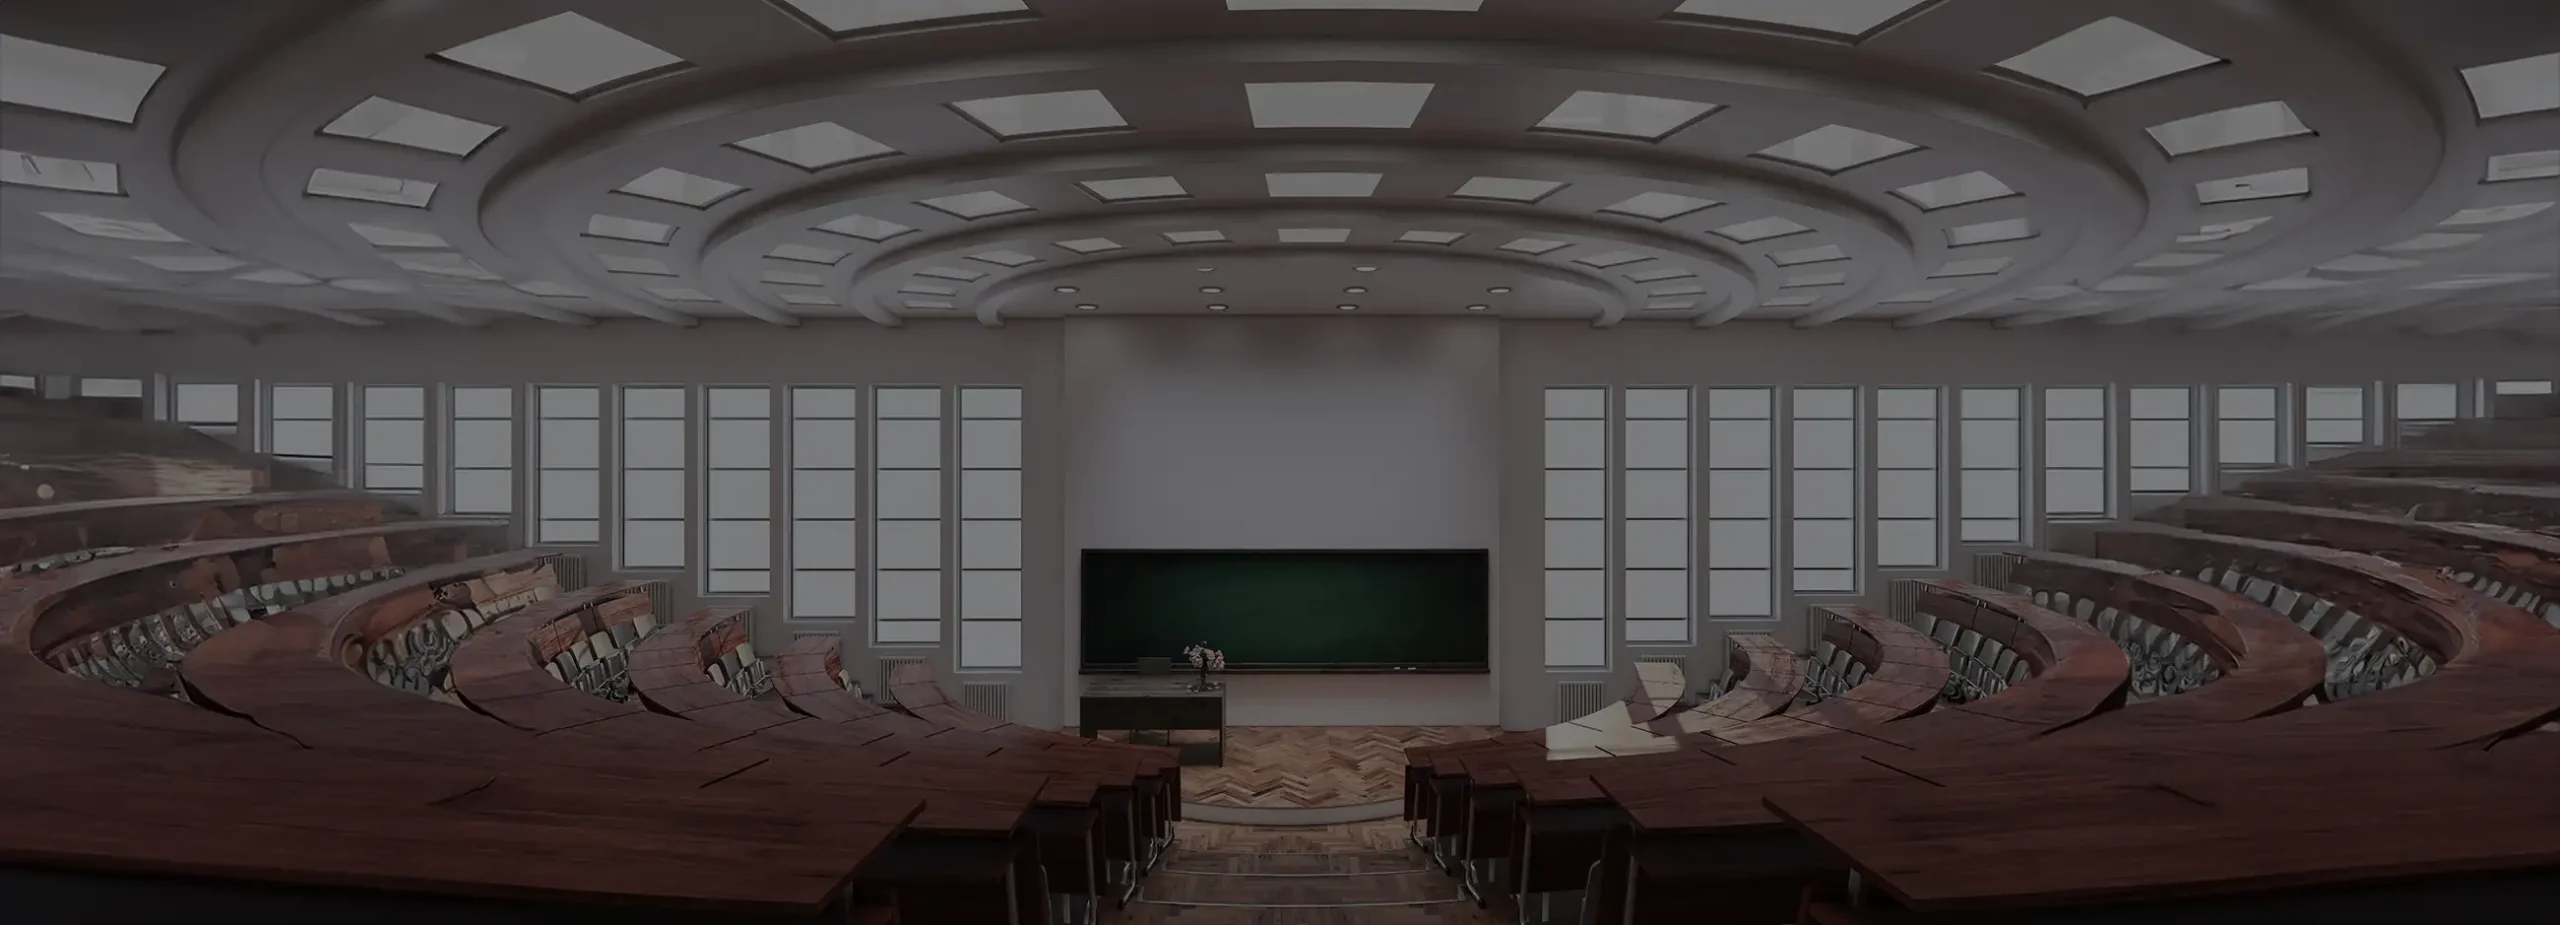 Large University Lecture Hall